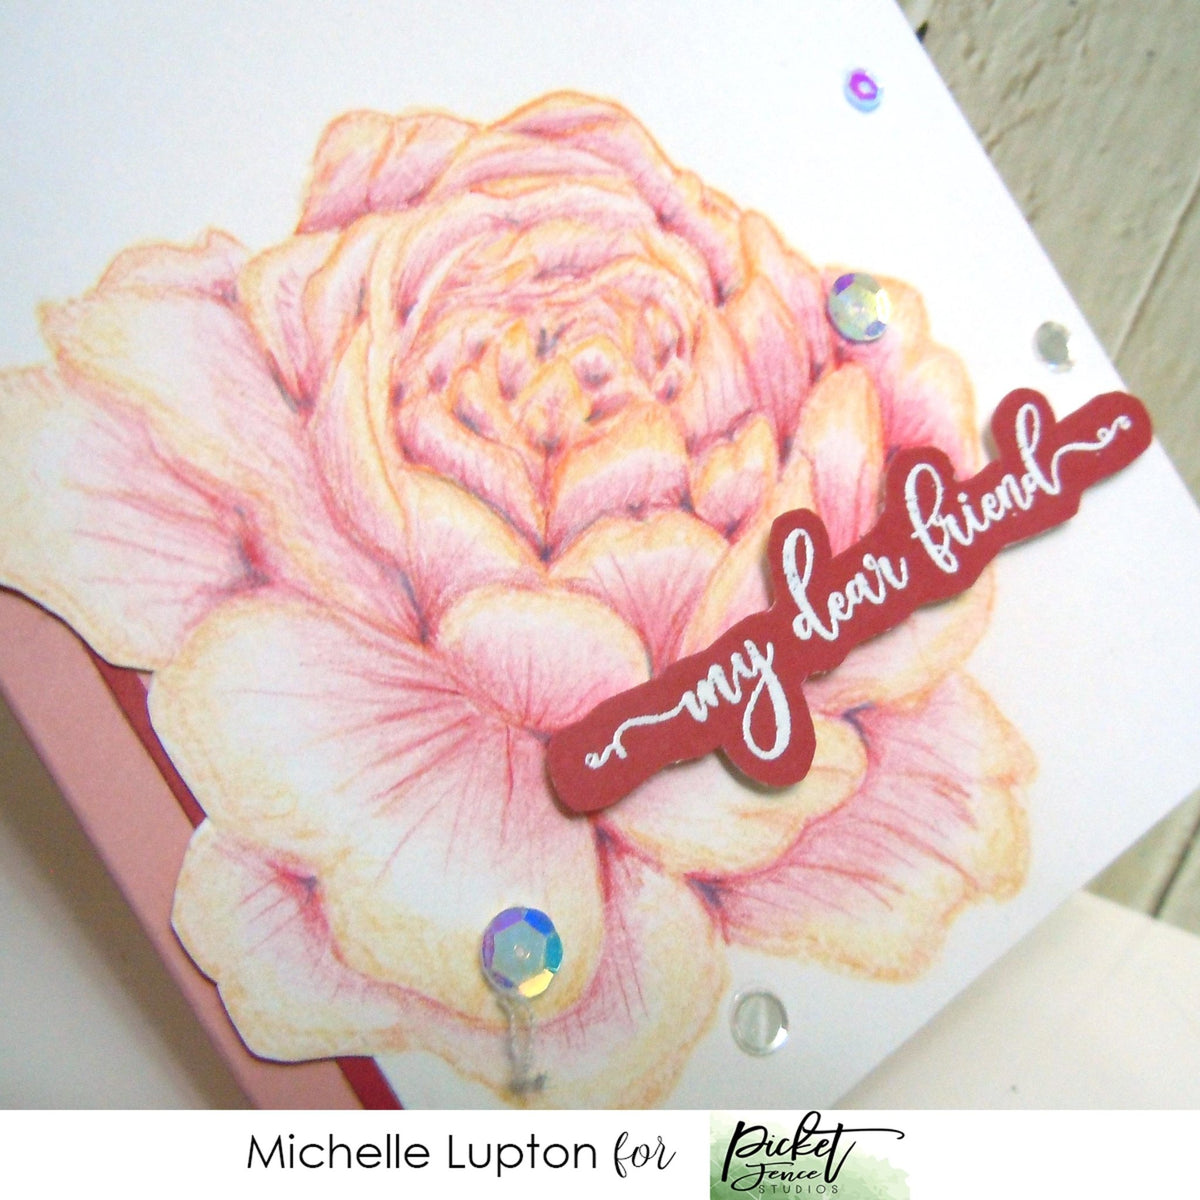 No-line colouring rose from Michelle image pic